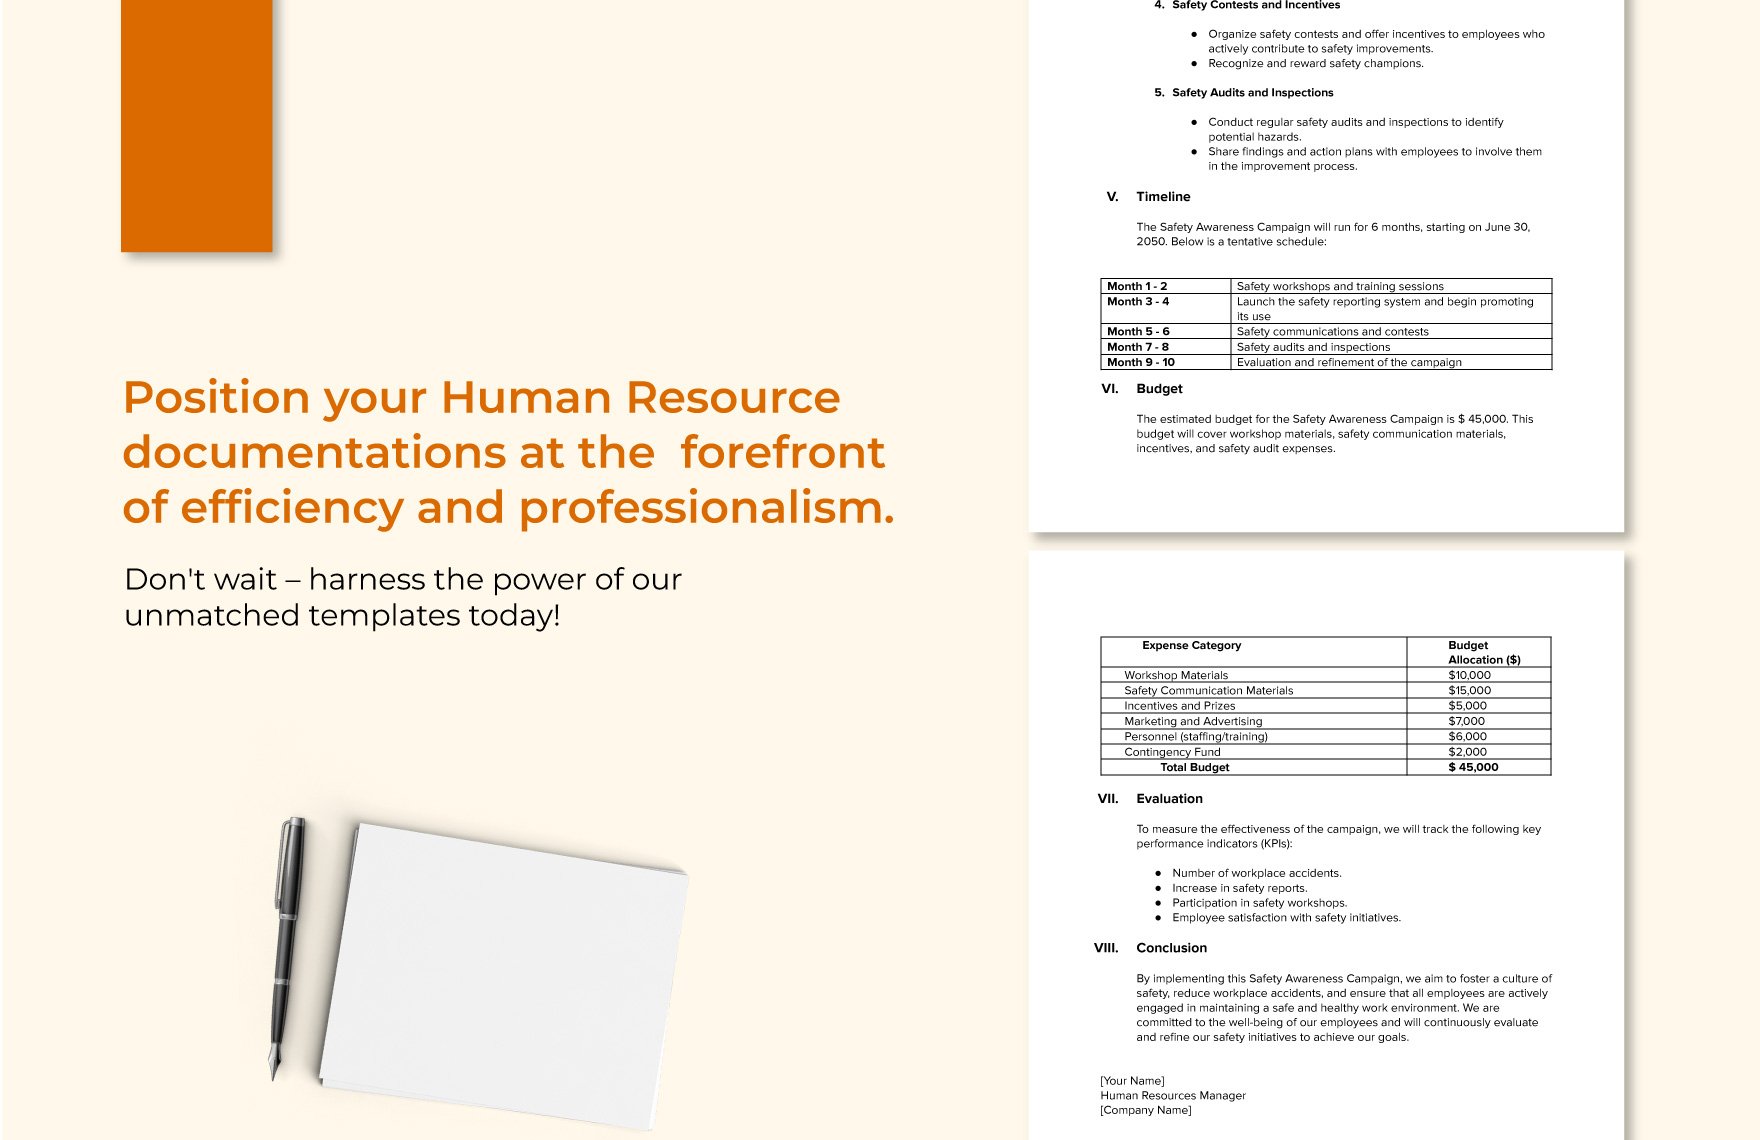 Safety Awareness Campaign Plan HR Template